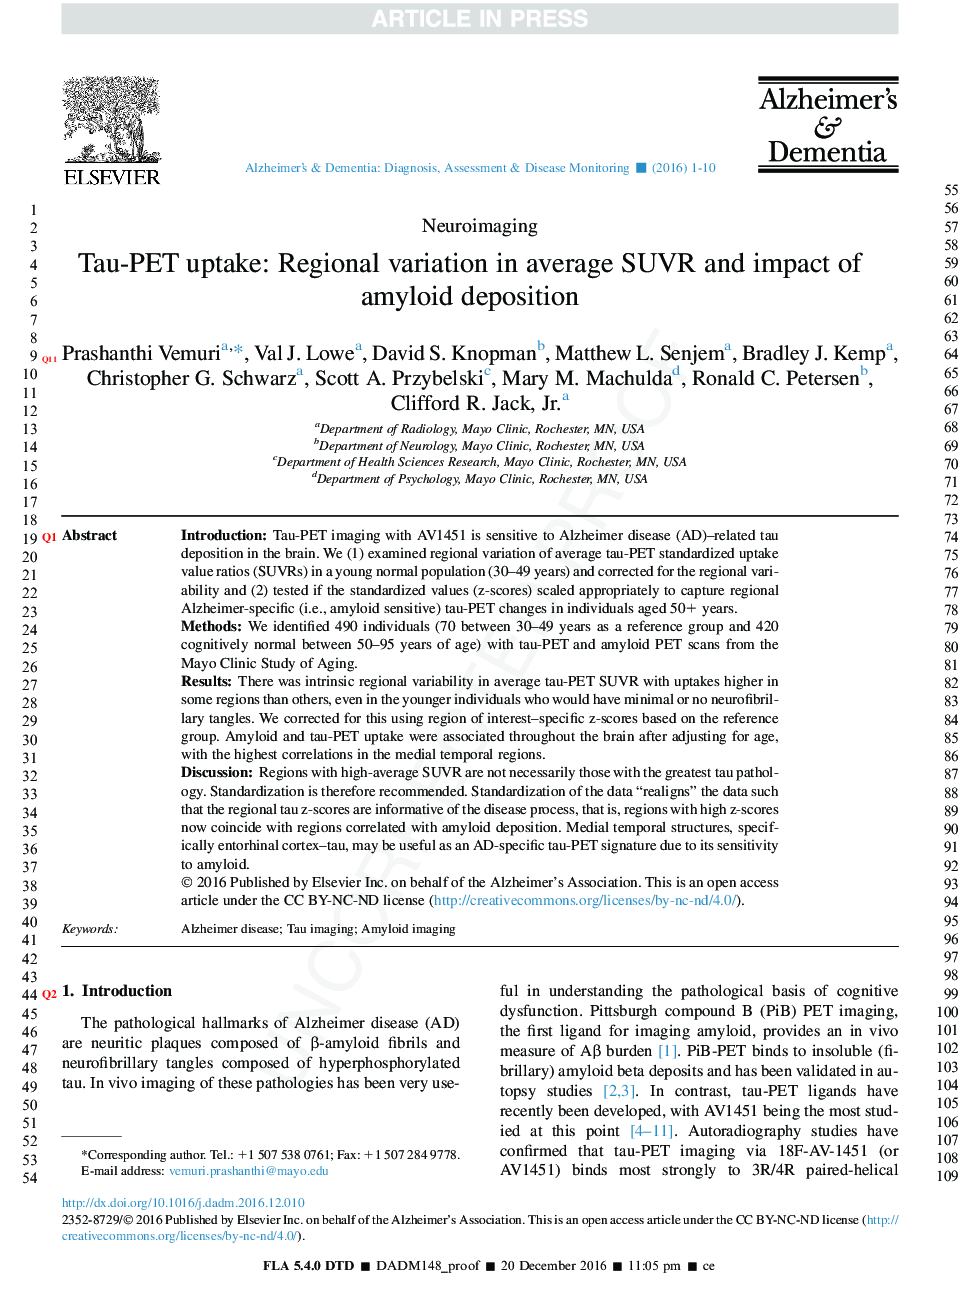 Tau-PET uptake: Regional variation in average SUVR and impact of amyloid deposition